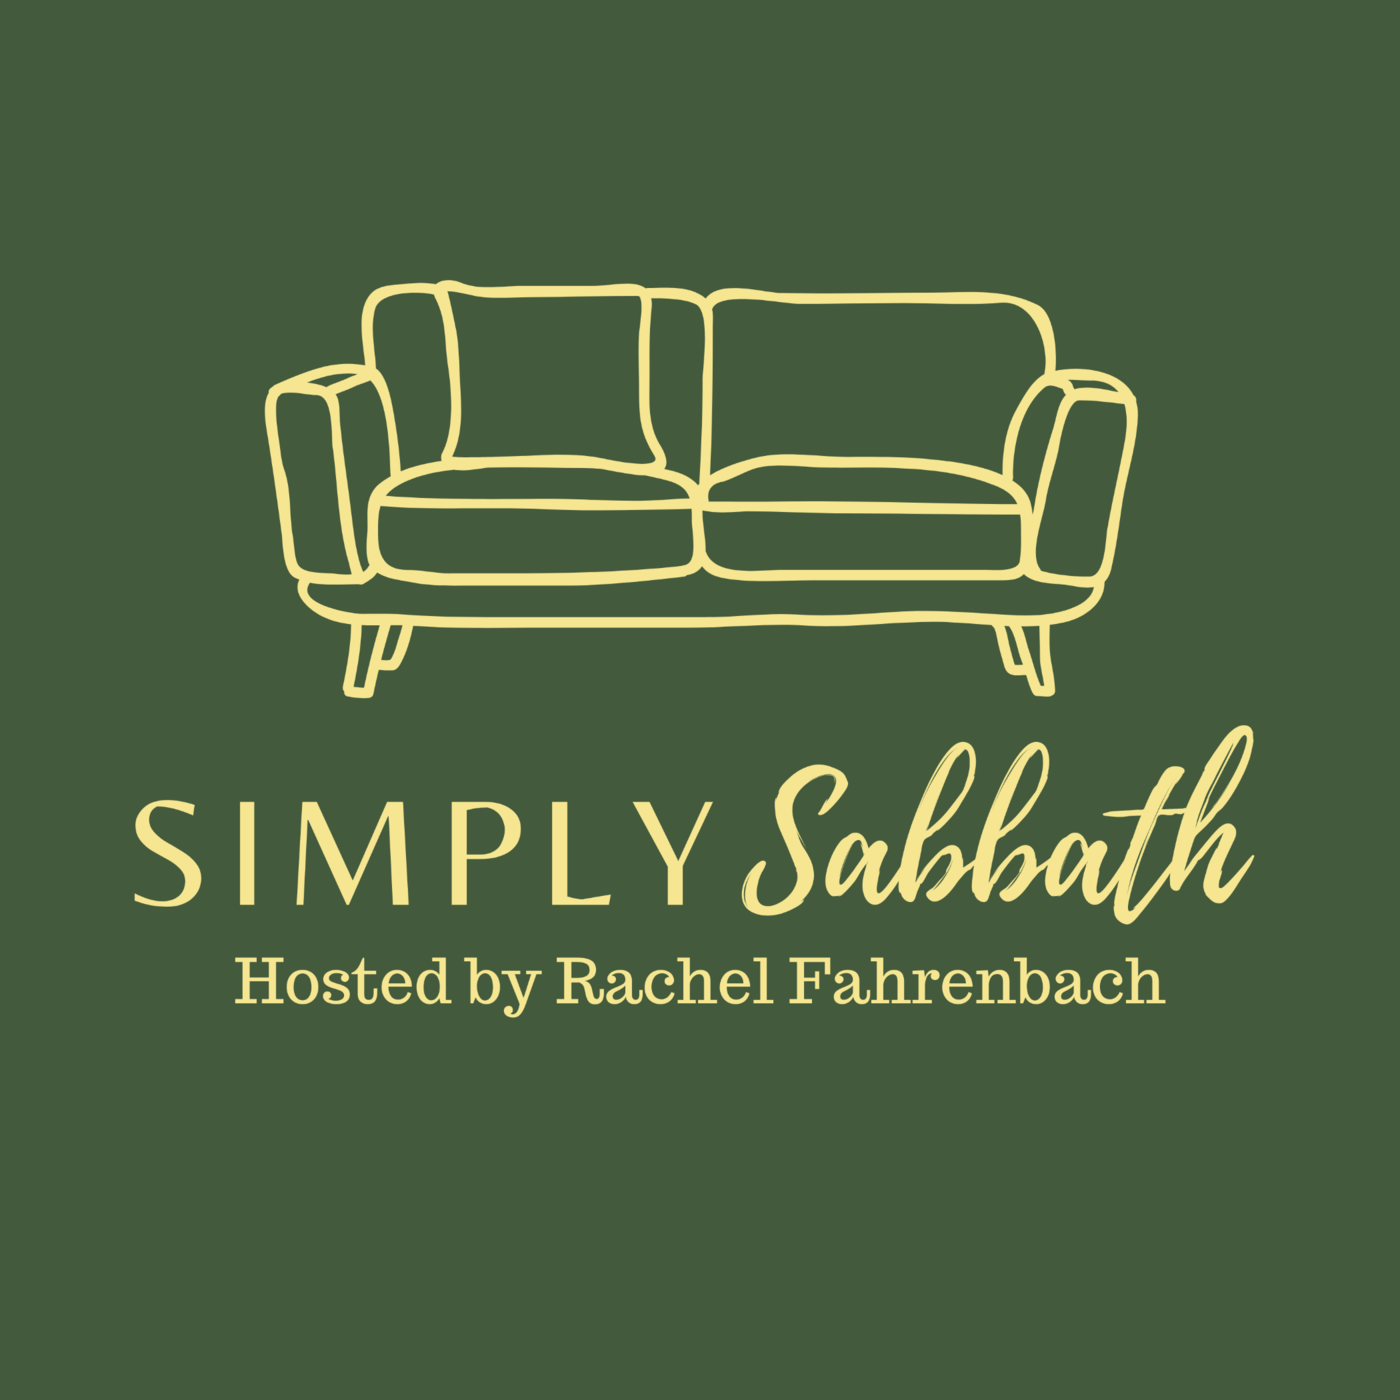 Ep 28: 5 Tips for Connecting with Your Spouse during Sabbath